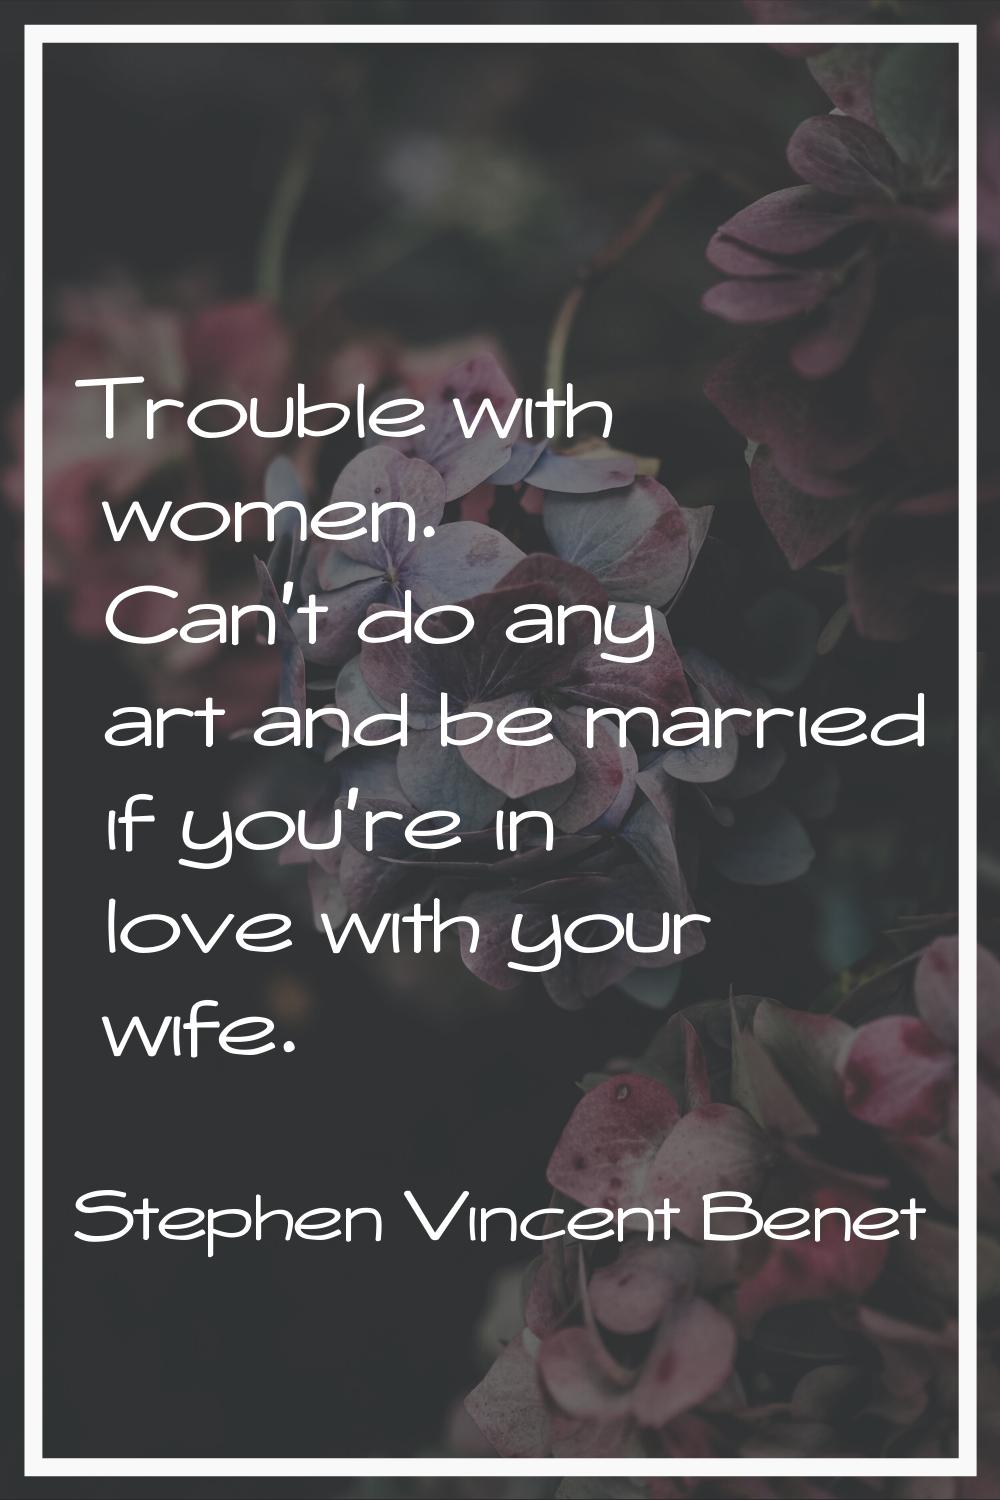 Trouble with women. Can't do any art and be married if you're in love with your wife.